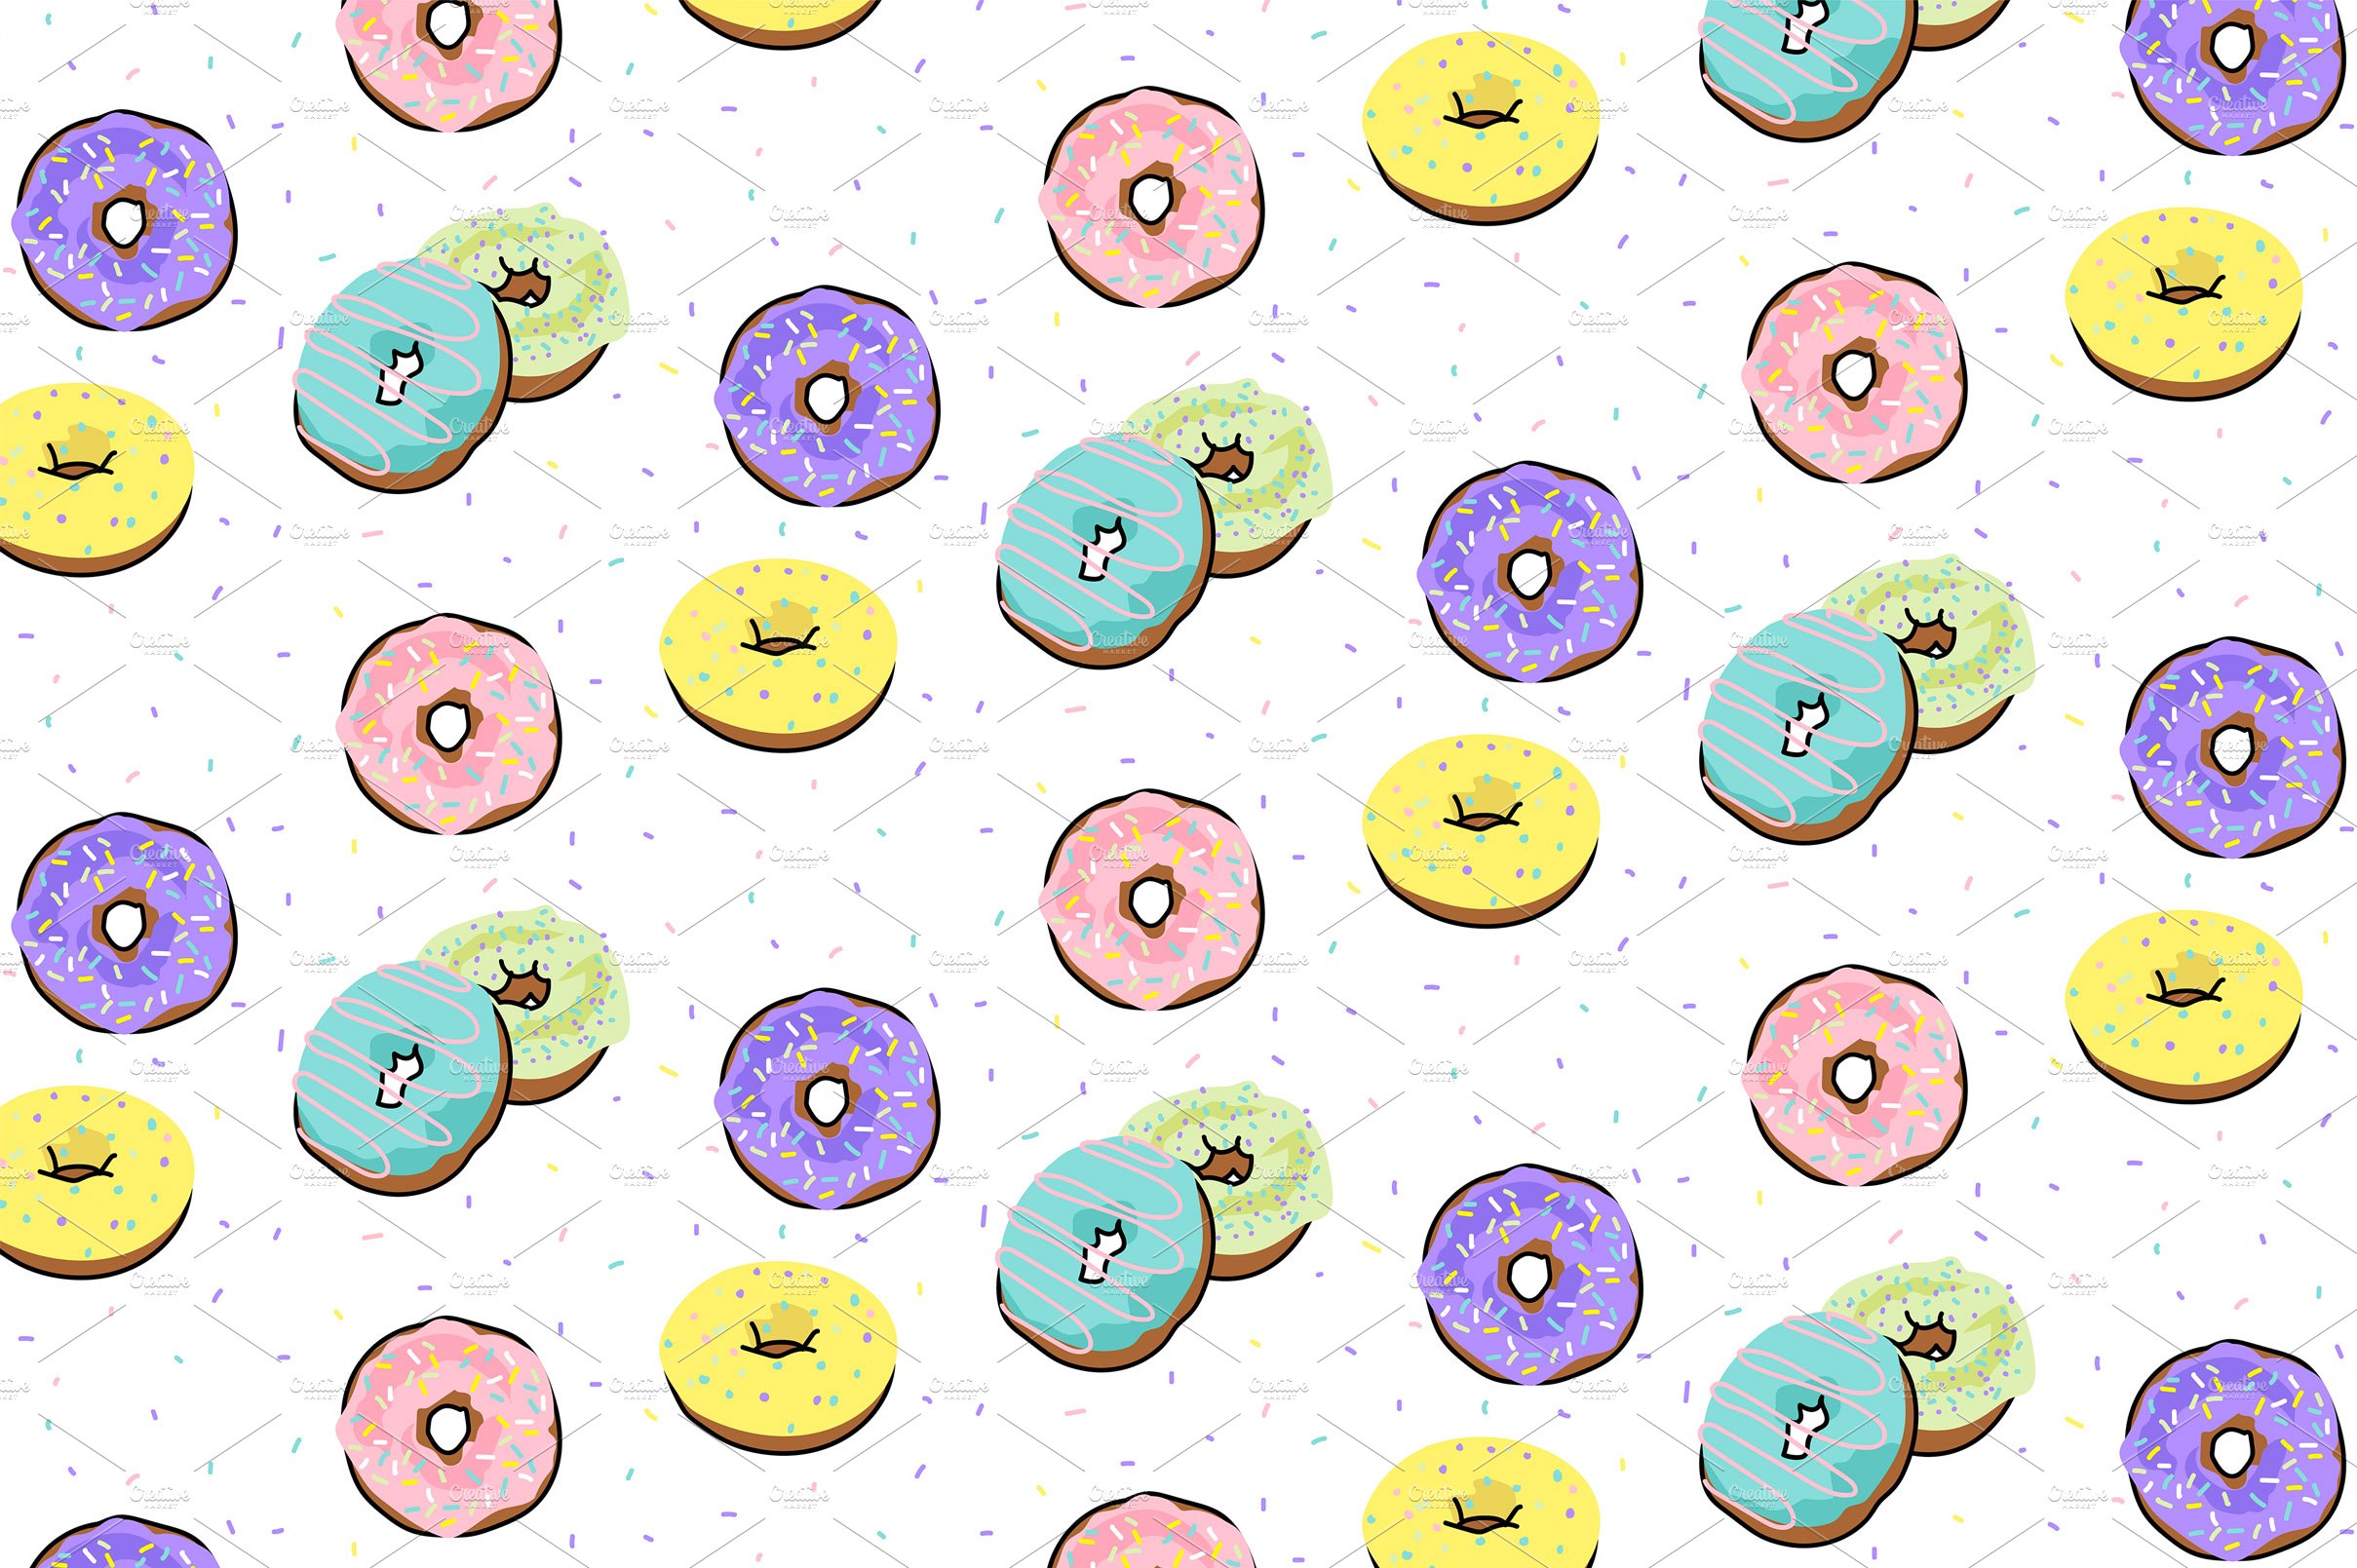 Colorful sweets patterns preview image.